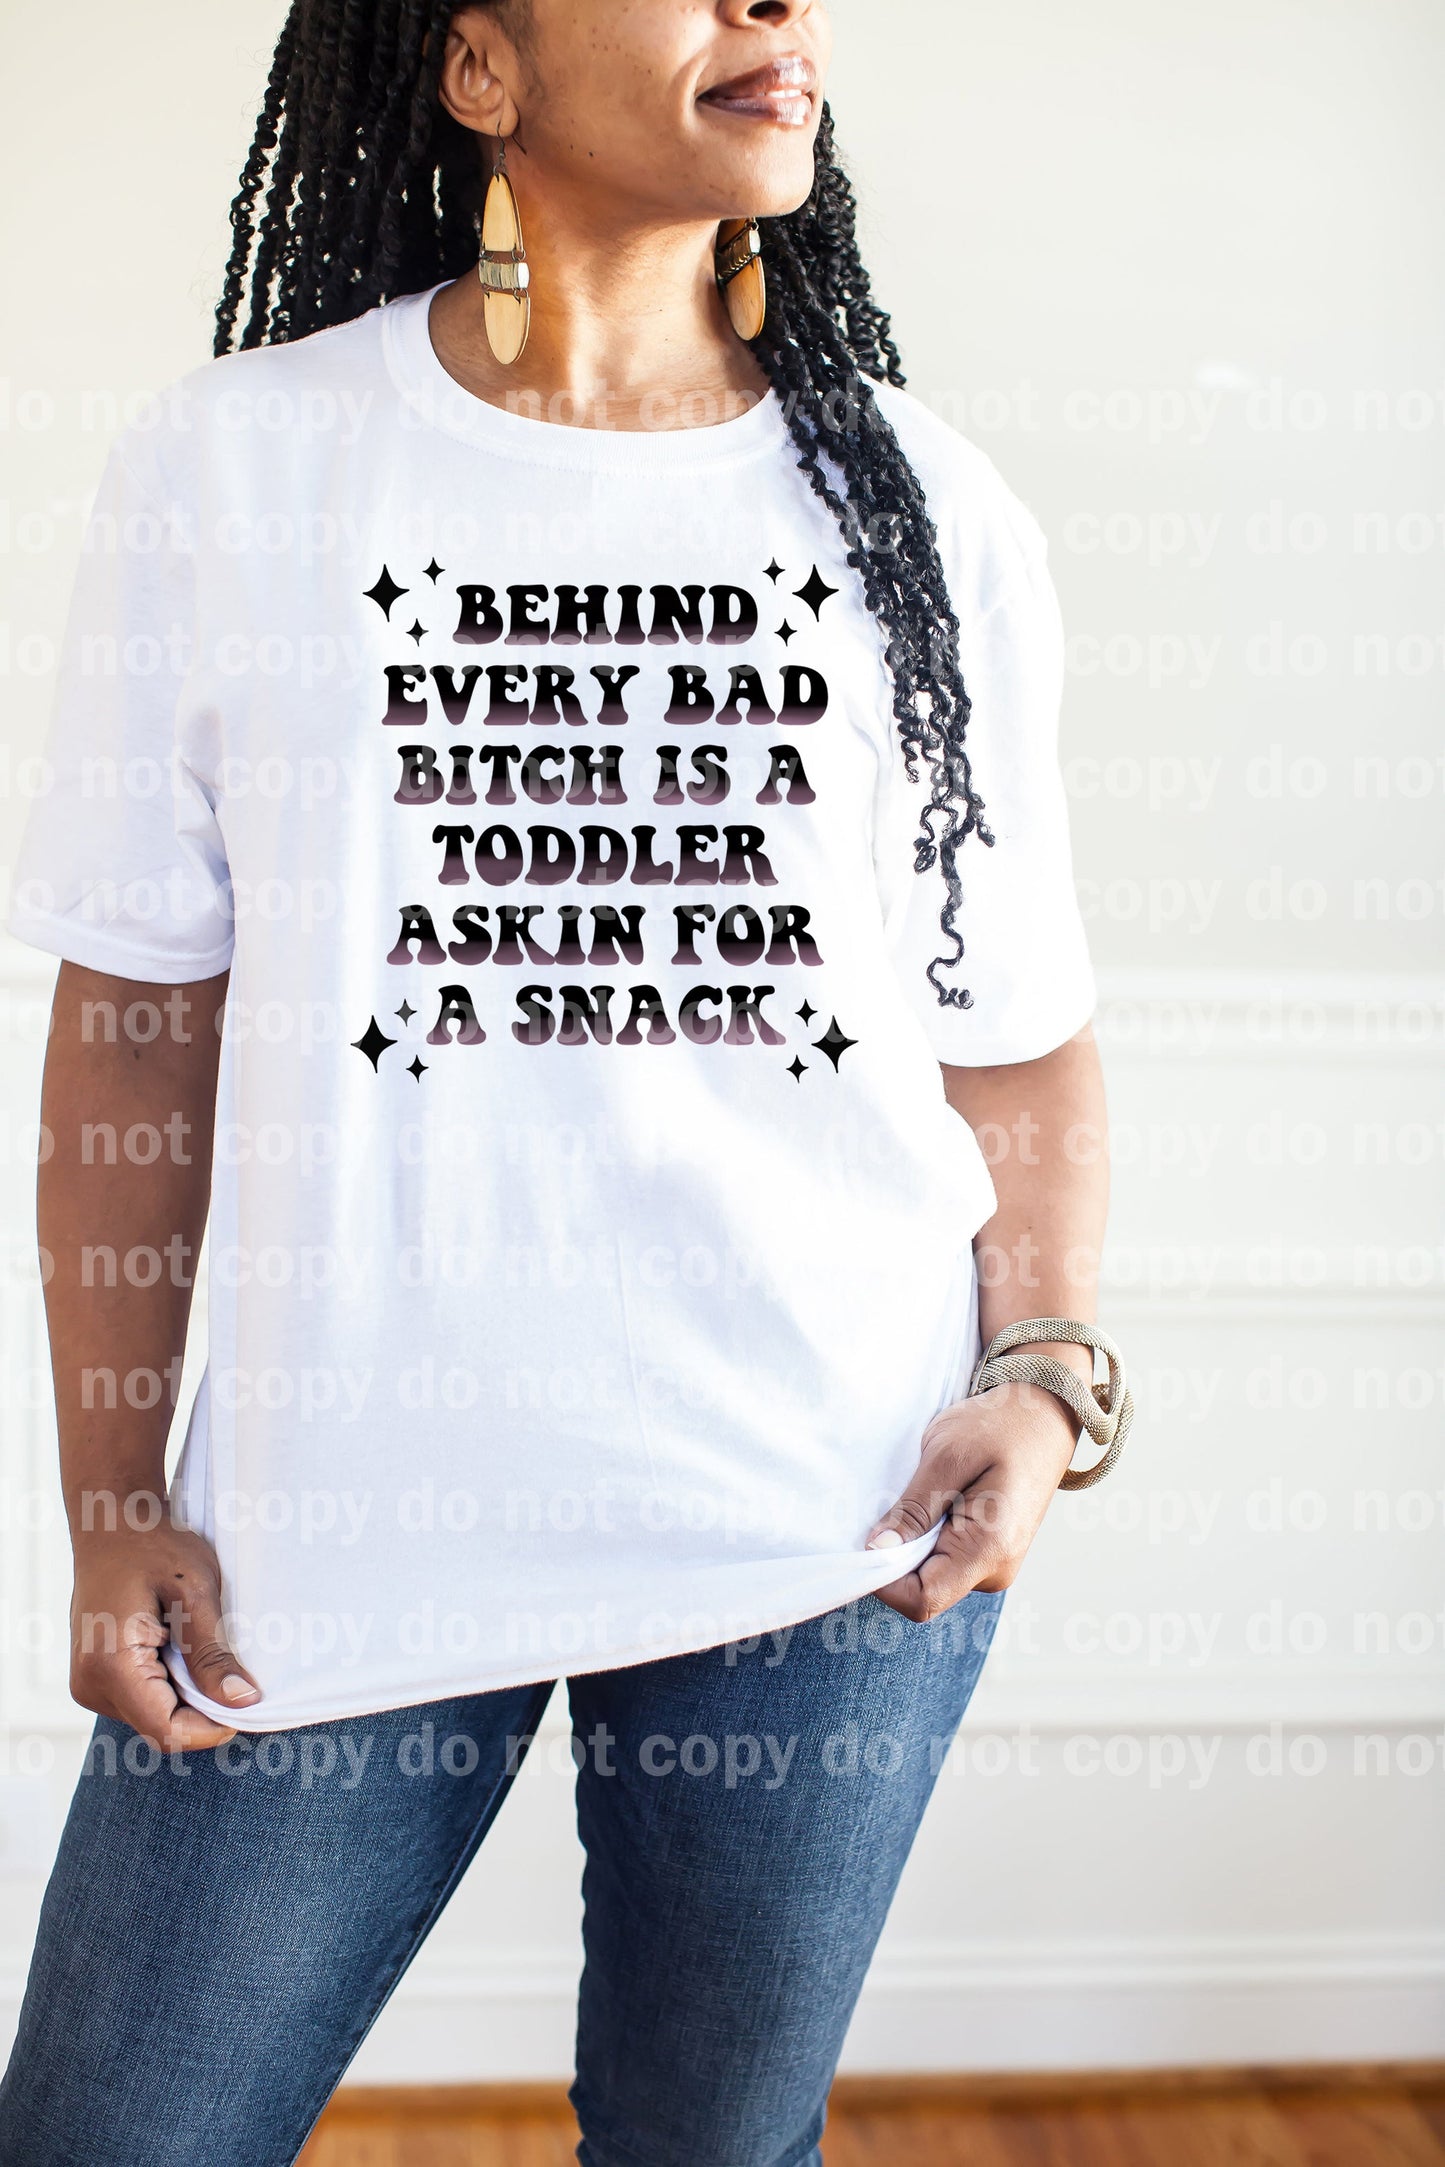 Behind Every Bad Bitch Is A Toddler Asking For A Snack Dream Print or Sublimation Print